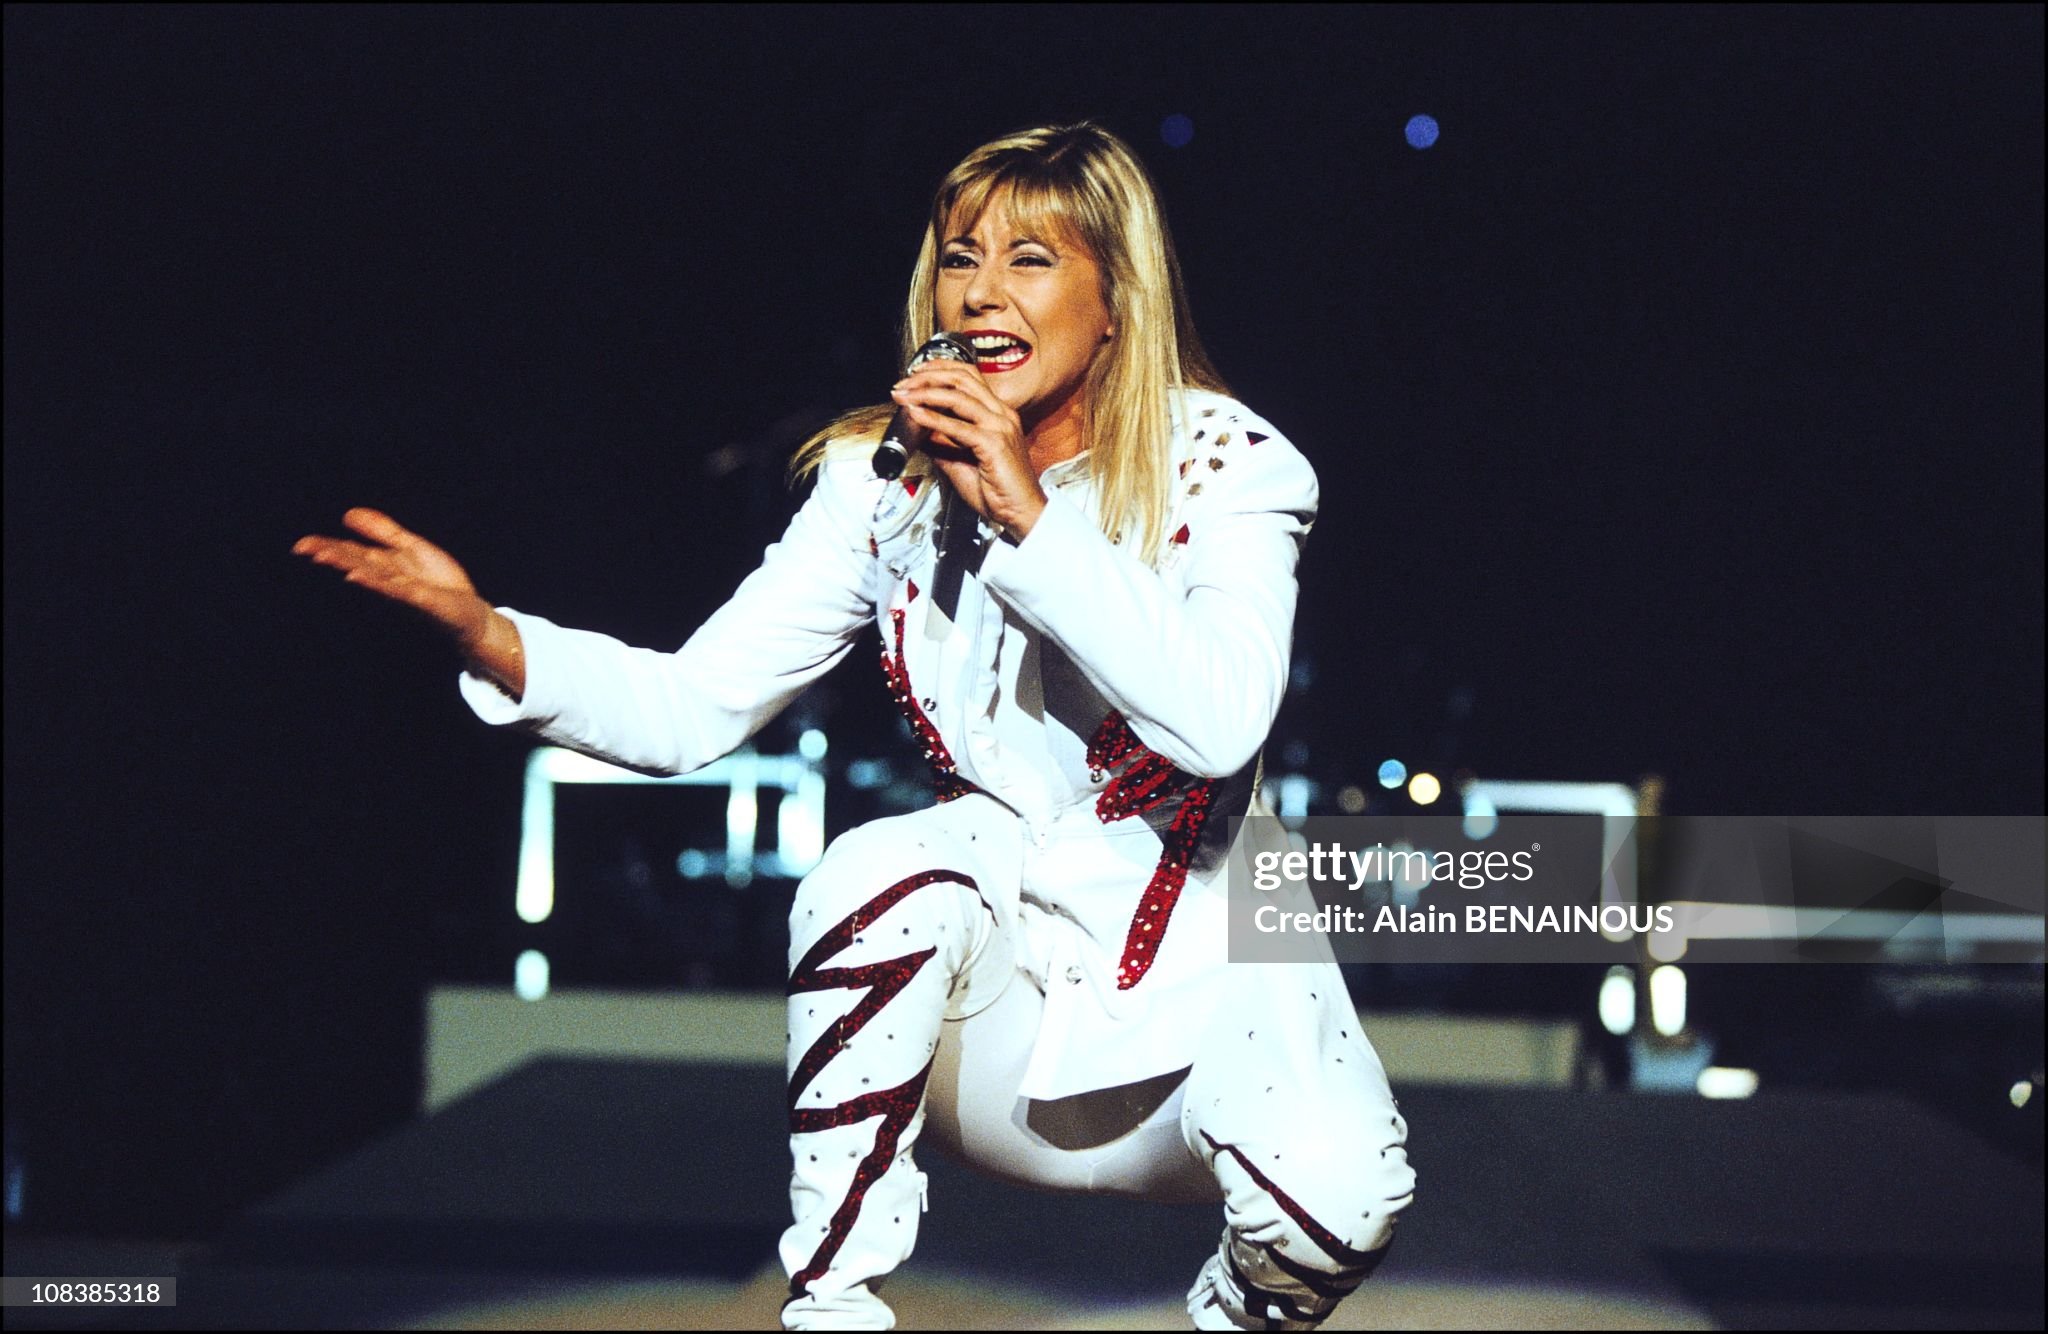 Bercy 93 - Le topic officiel - Page 3 France-dorothee-at-the-concert-in-bercy-in-paris-france-on-january-06-1993